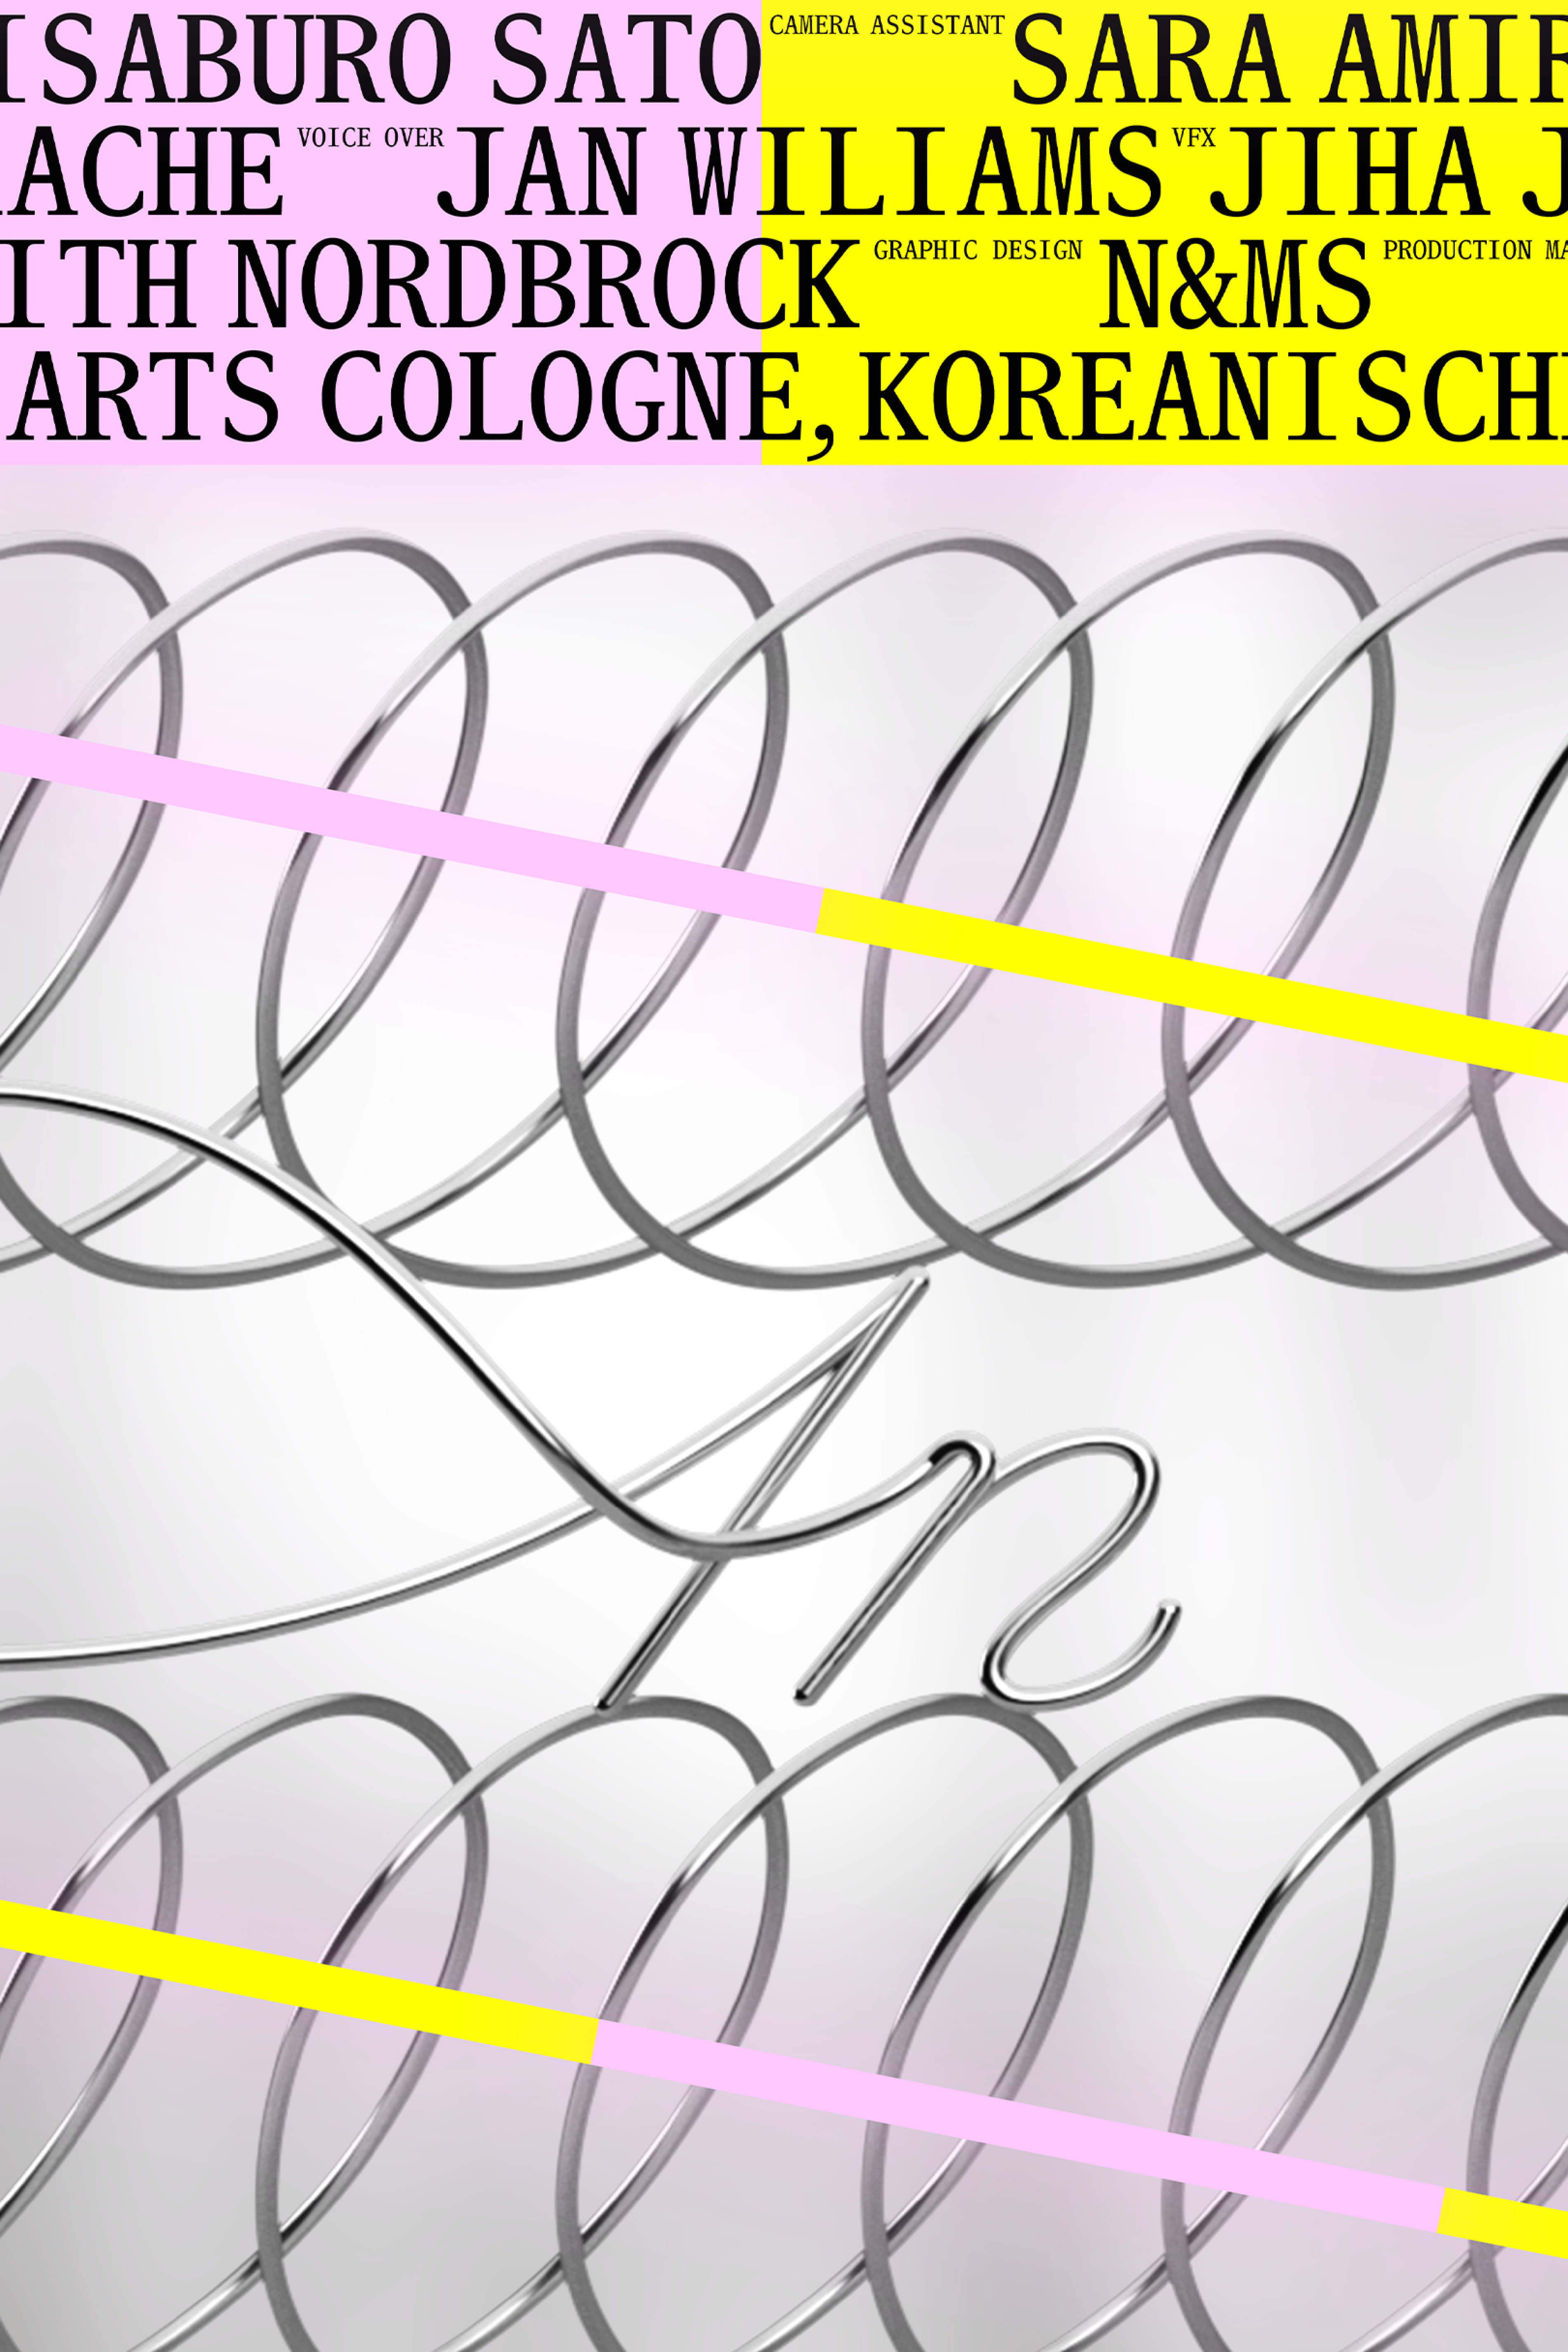 Close detail of the poster with a chromed display title decorated with yellow and pink elements.